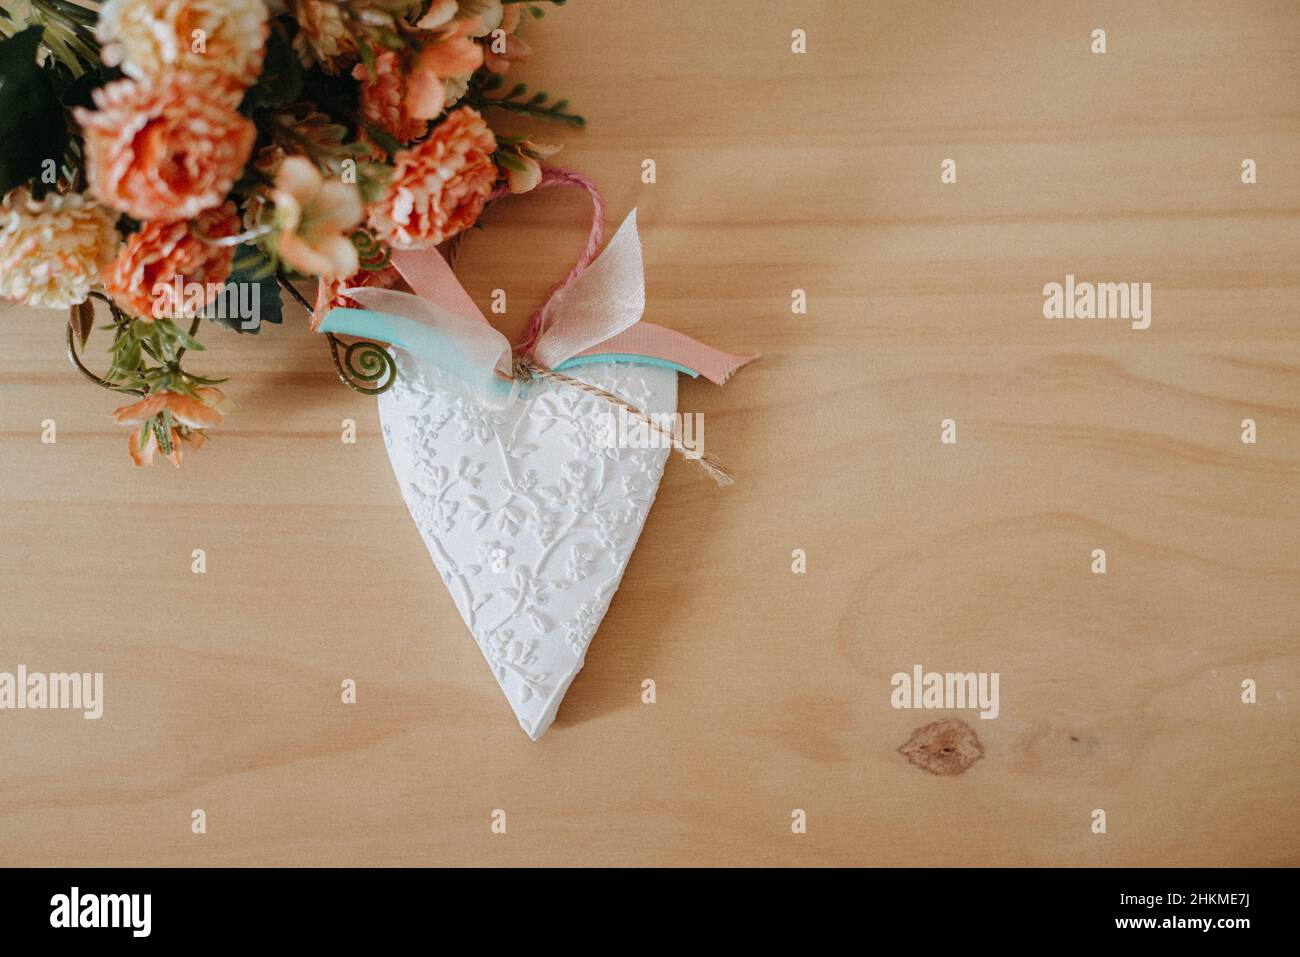 wooden table with a bouquet of flowers and a white heart Stock Photo